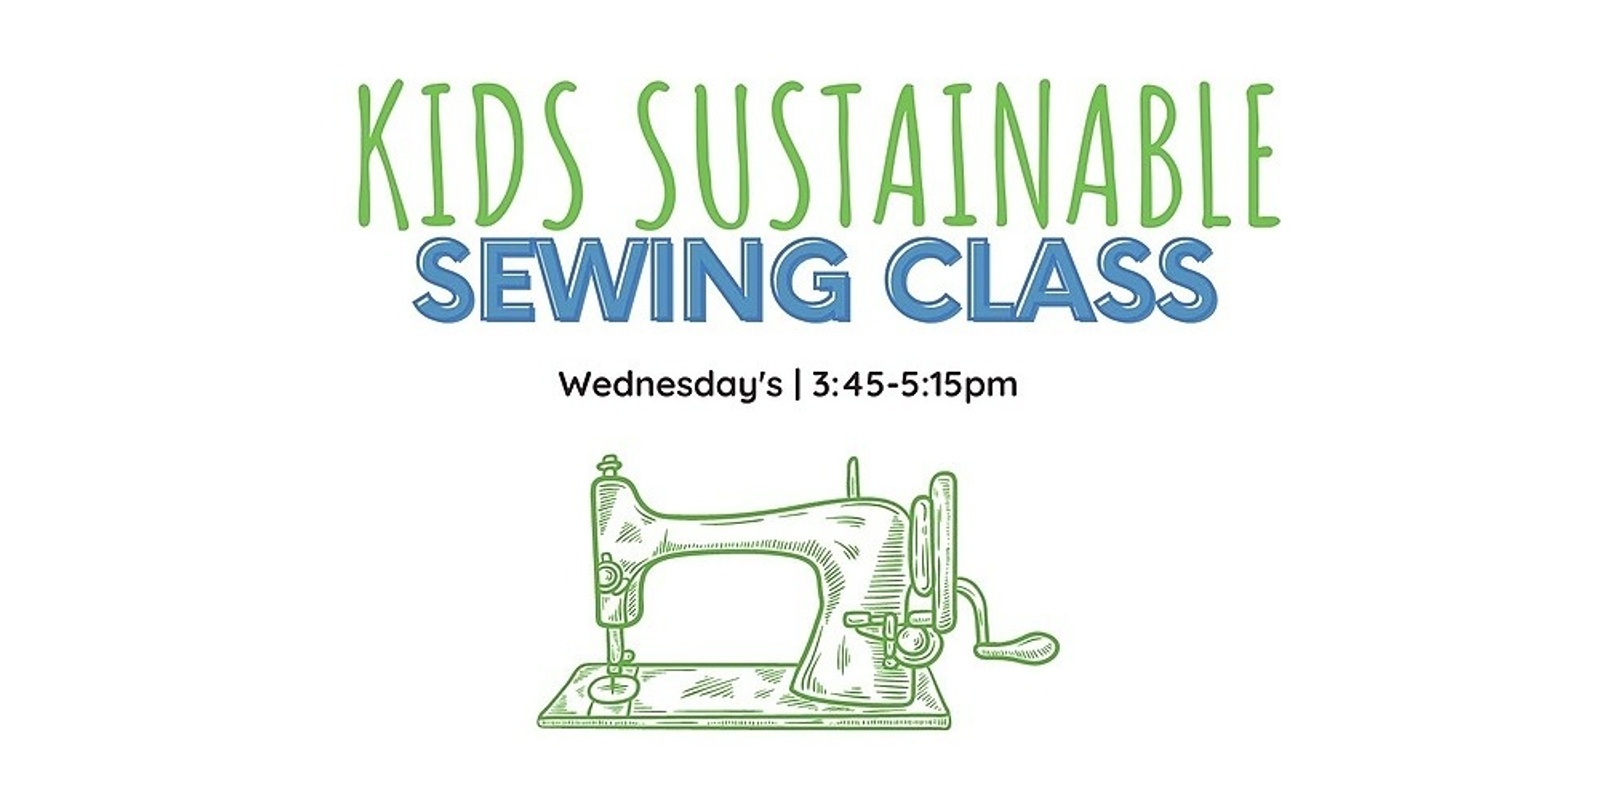 Kids Sustainable Sewing Class | 3:45-5:15pm